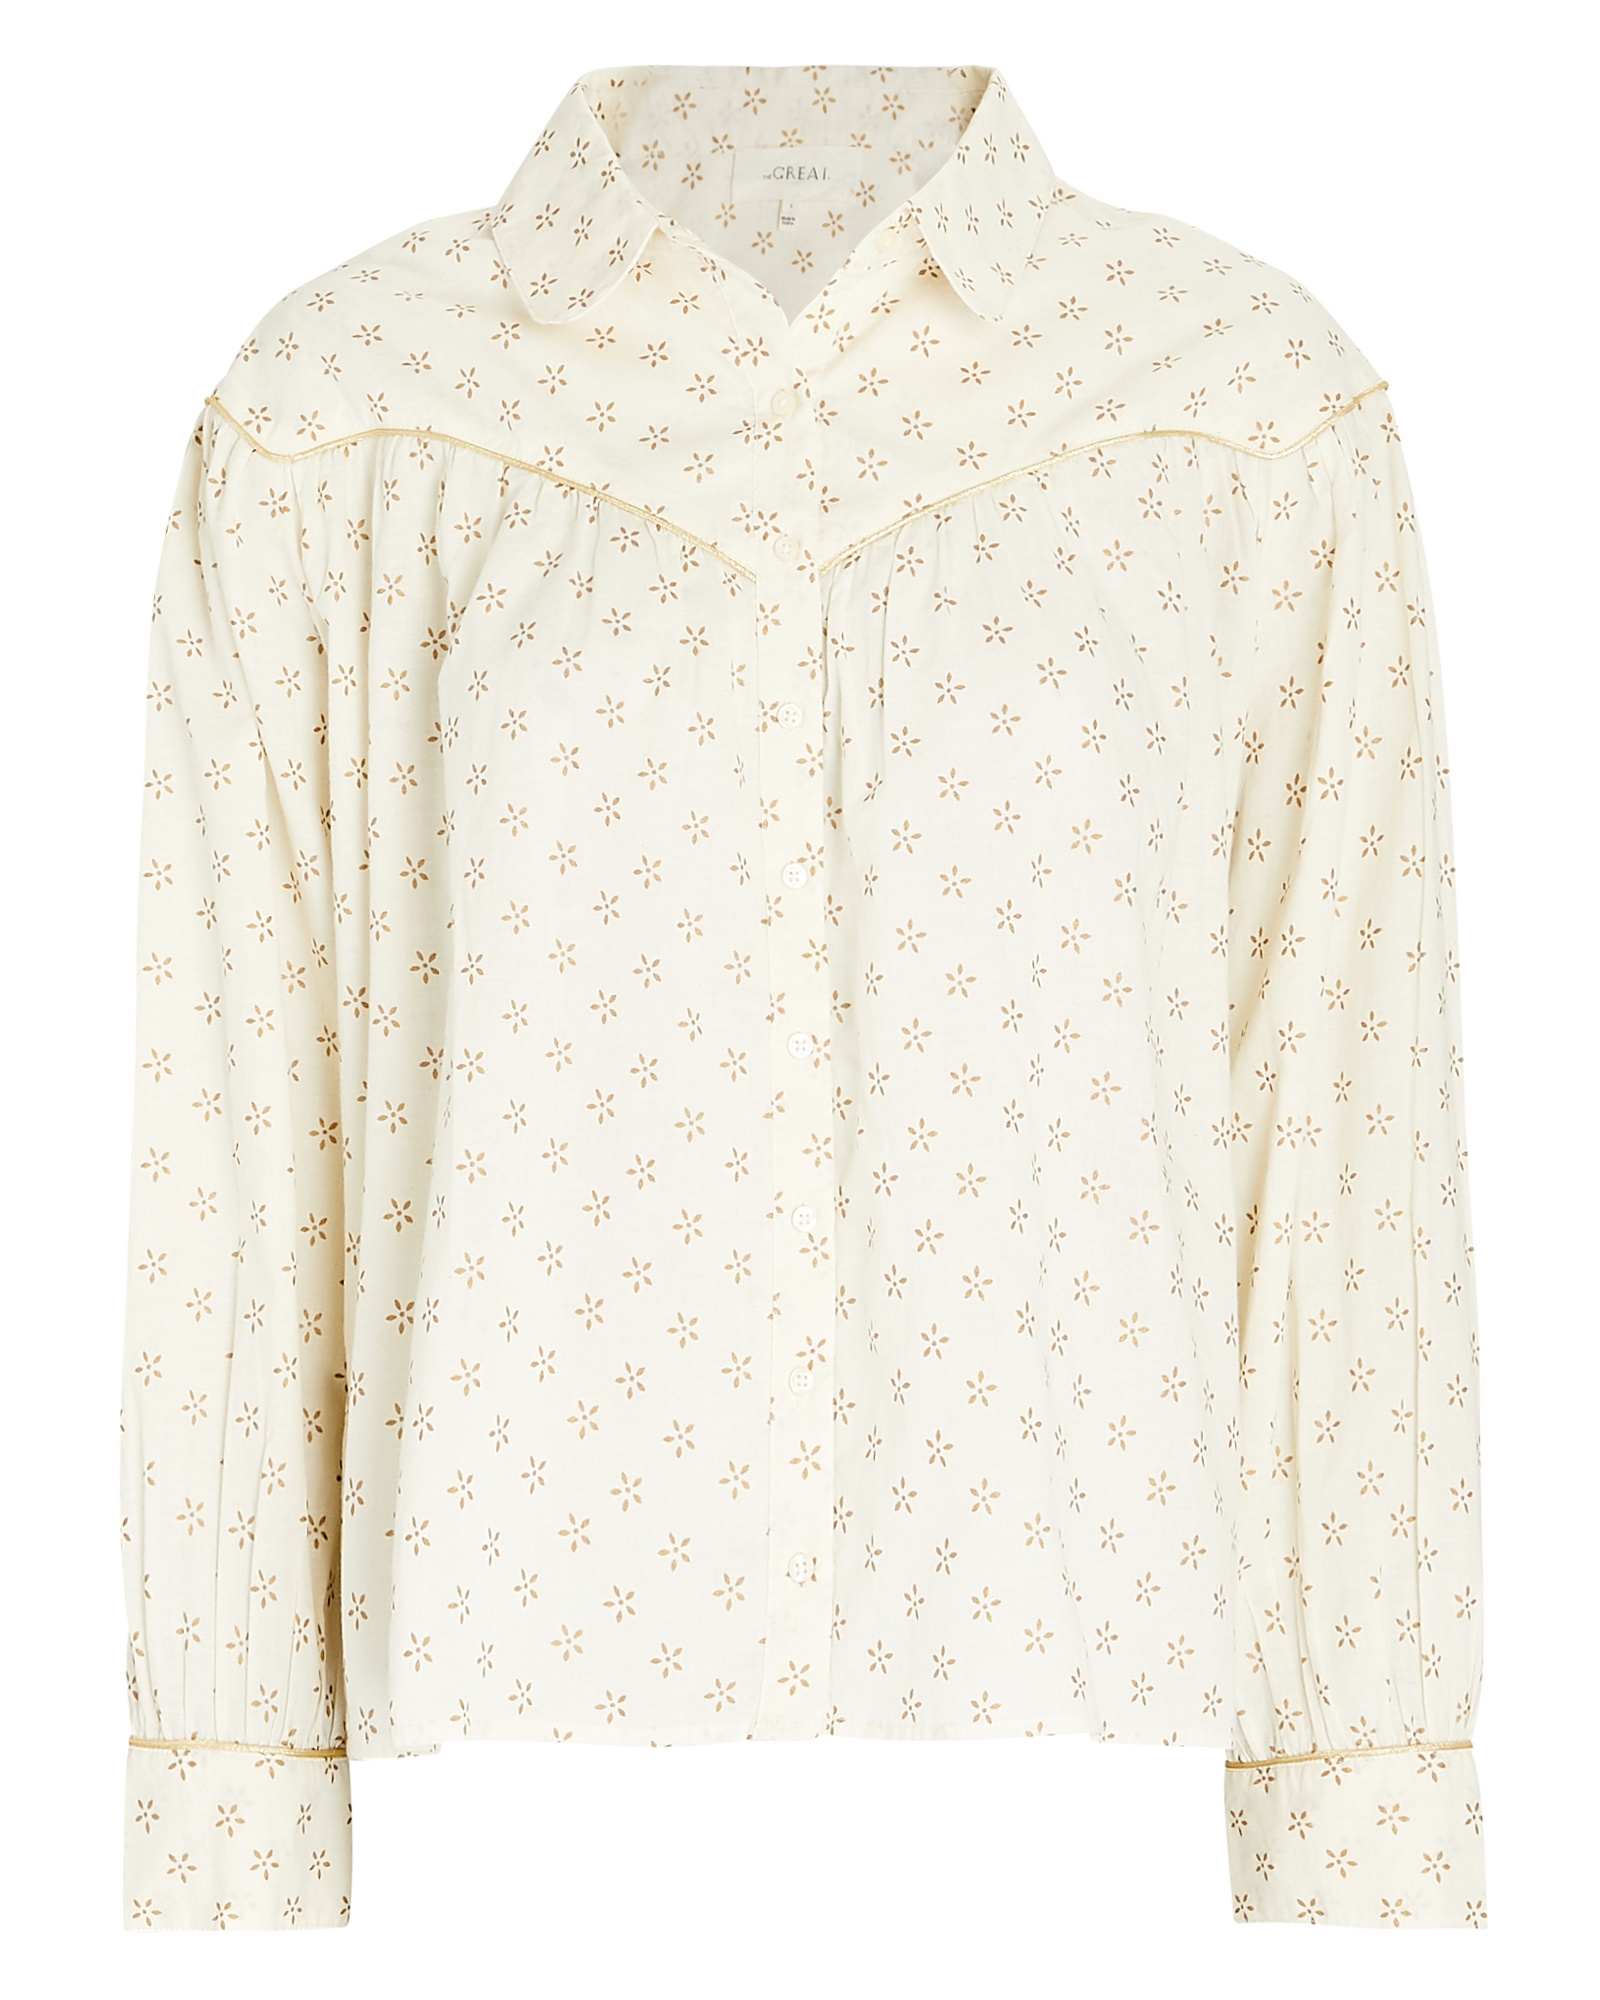 The Great Western Printed Shirt | INTERMIX®